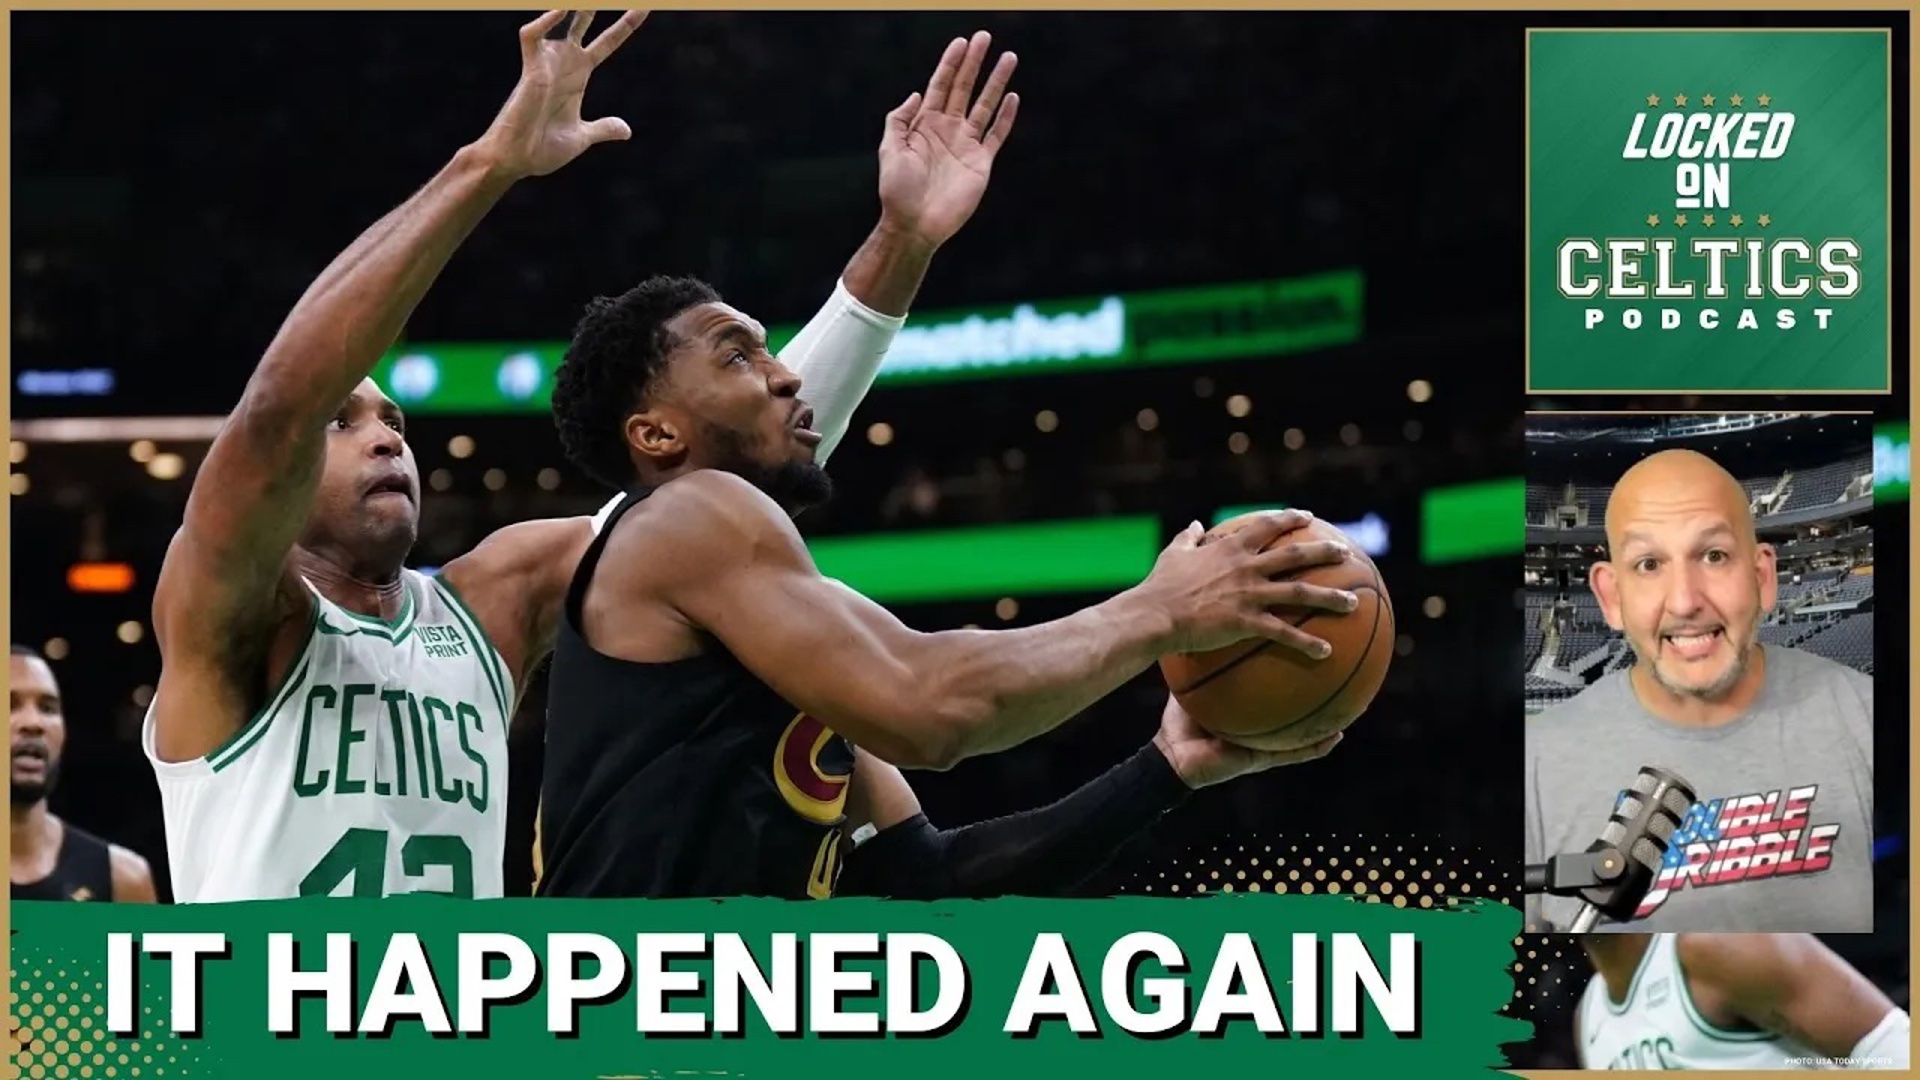 The Celtics came out strong built a big lead and then let go when the shot stopped falling, leading to a generally bad defensive effort and a familiar Game 2.